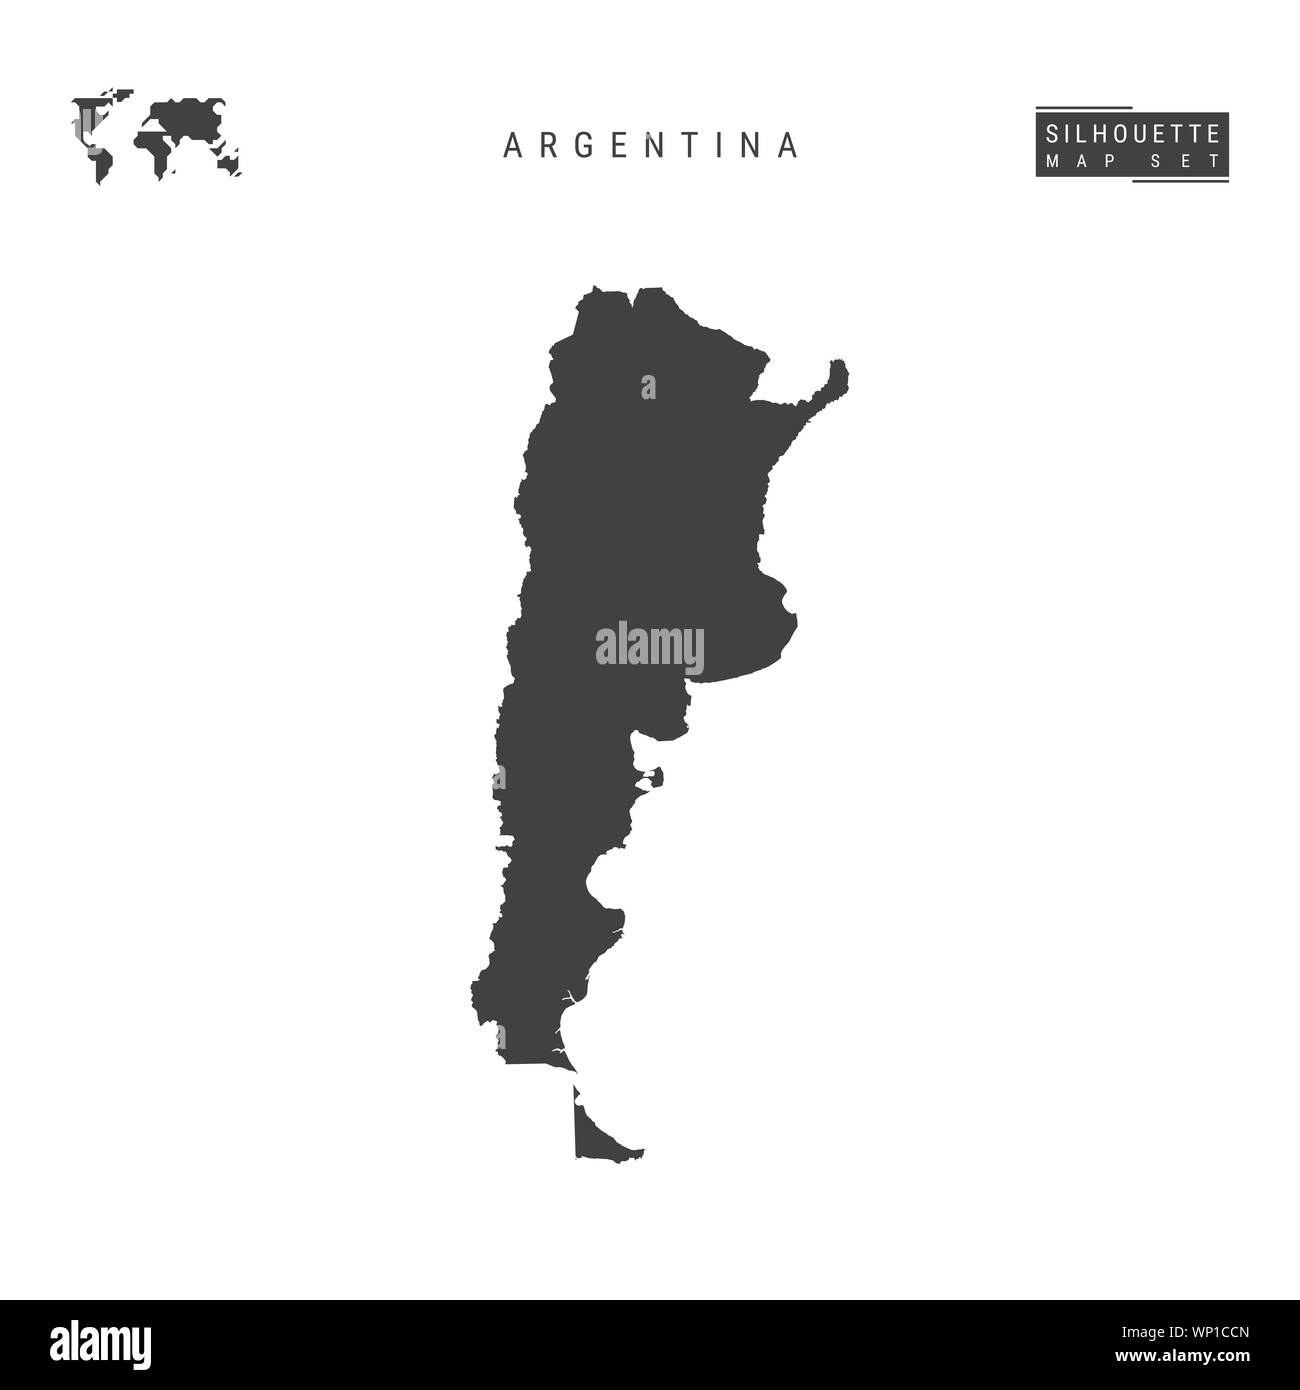 Argentina Blank Map Isolated on White Background. High-Detailed Black Silhouette Map of Argentina. Stock Photo